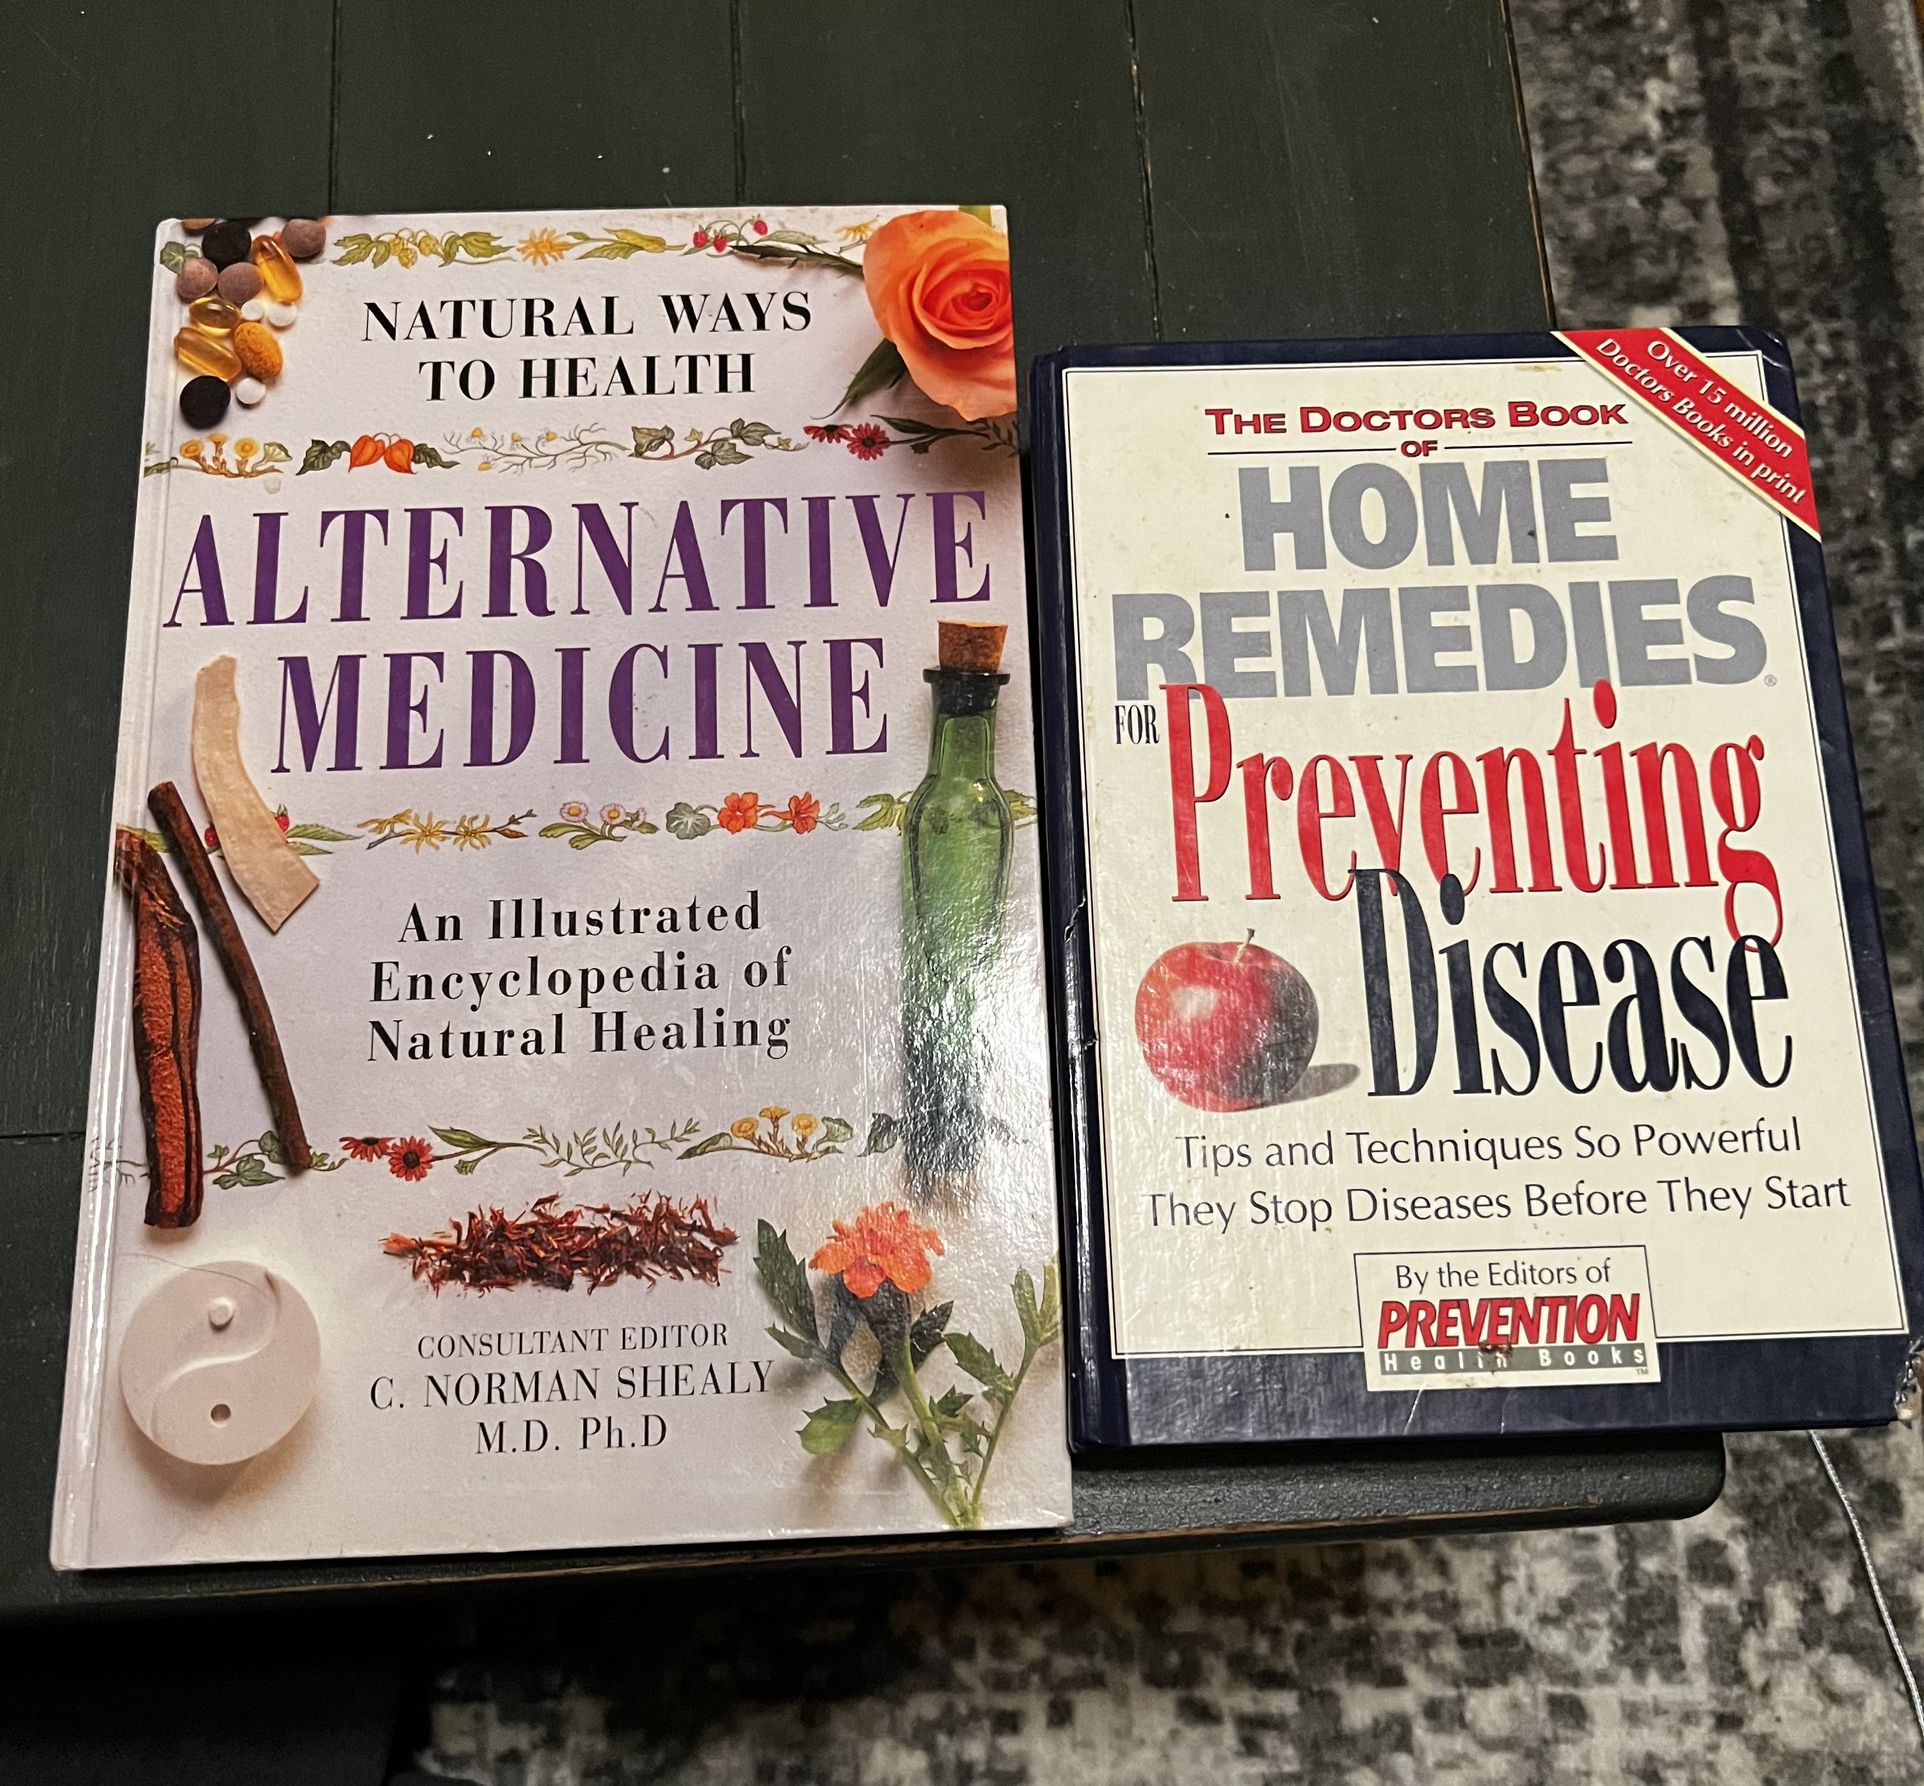 ALTERNATIVE MEDICINE: An Illustrated Encyclopedia Of Natural Healing & THE DOCTORS BOOK OF HOME REMEDIES FOR PREVENTING DISEASE 